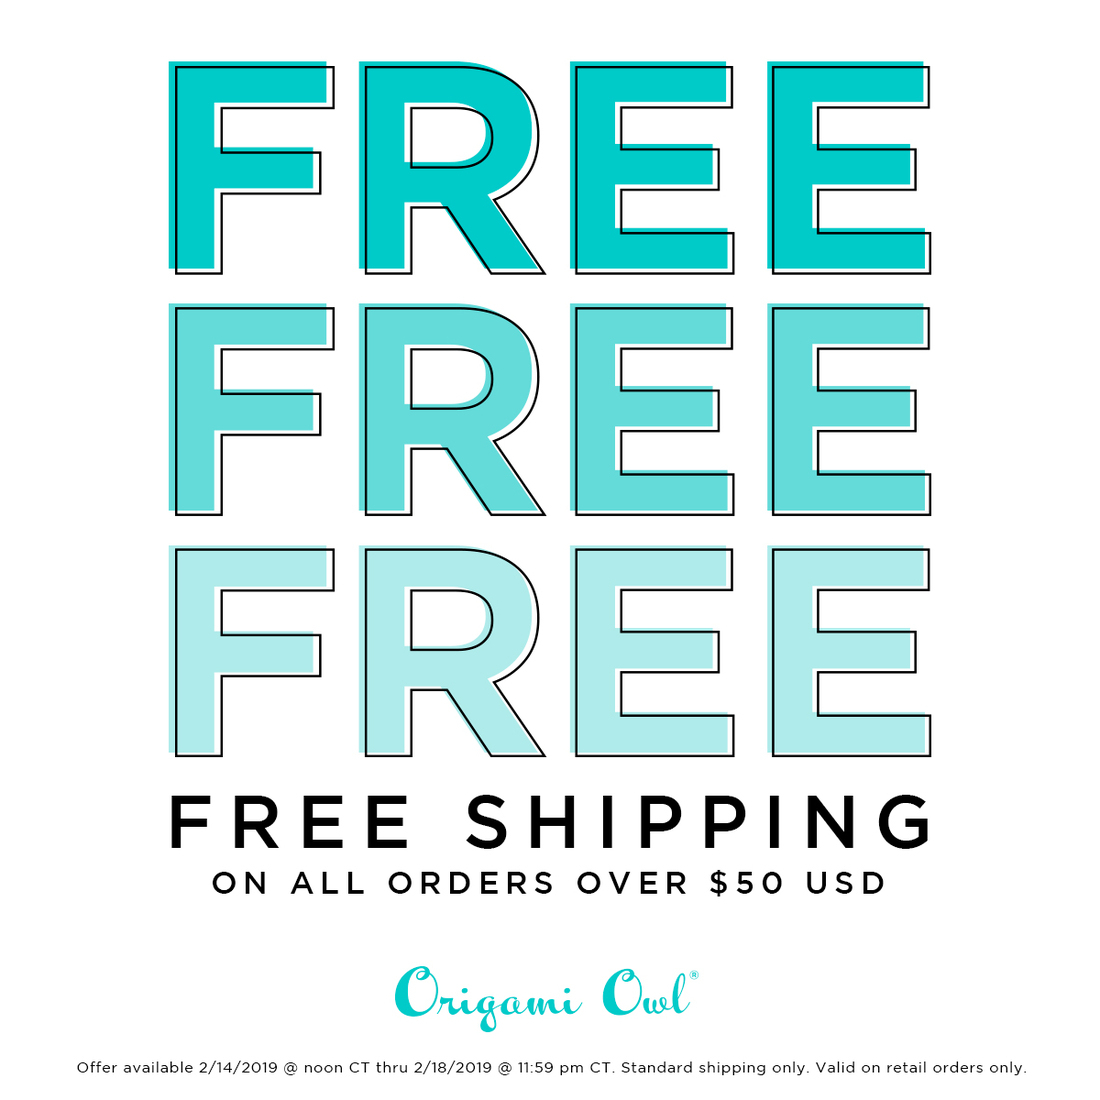 Coupons For Origami Owl Free Charm Promo Code Direct Sales And Home Based Business